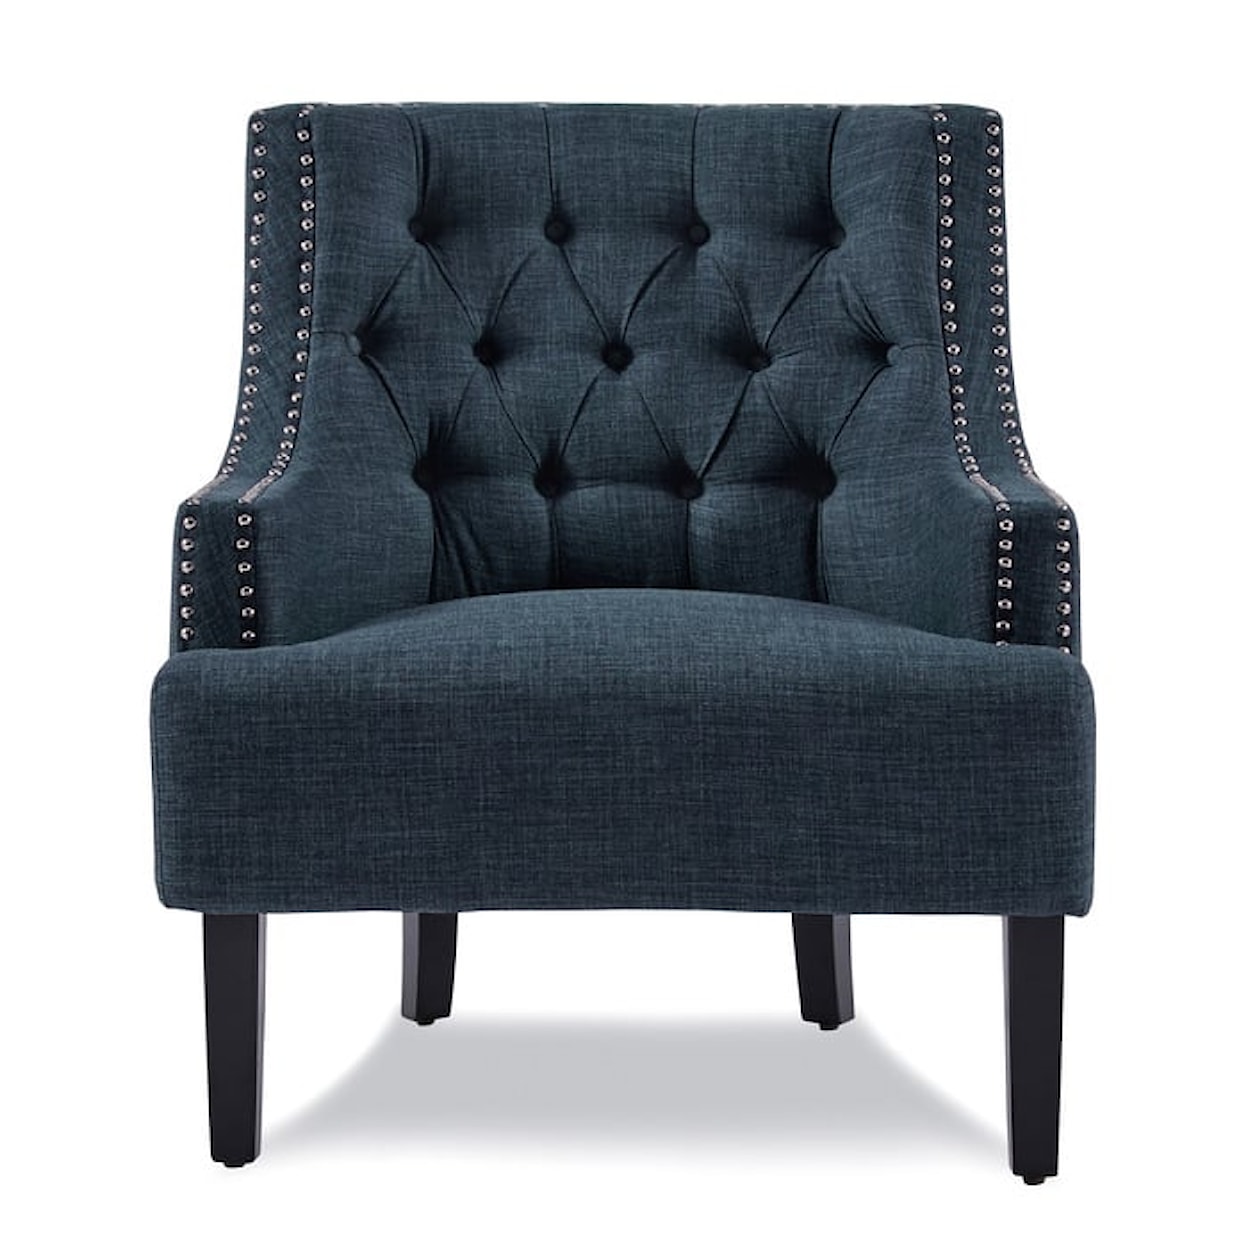 Homelegance Furniture Charisma Accent Chair